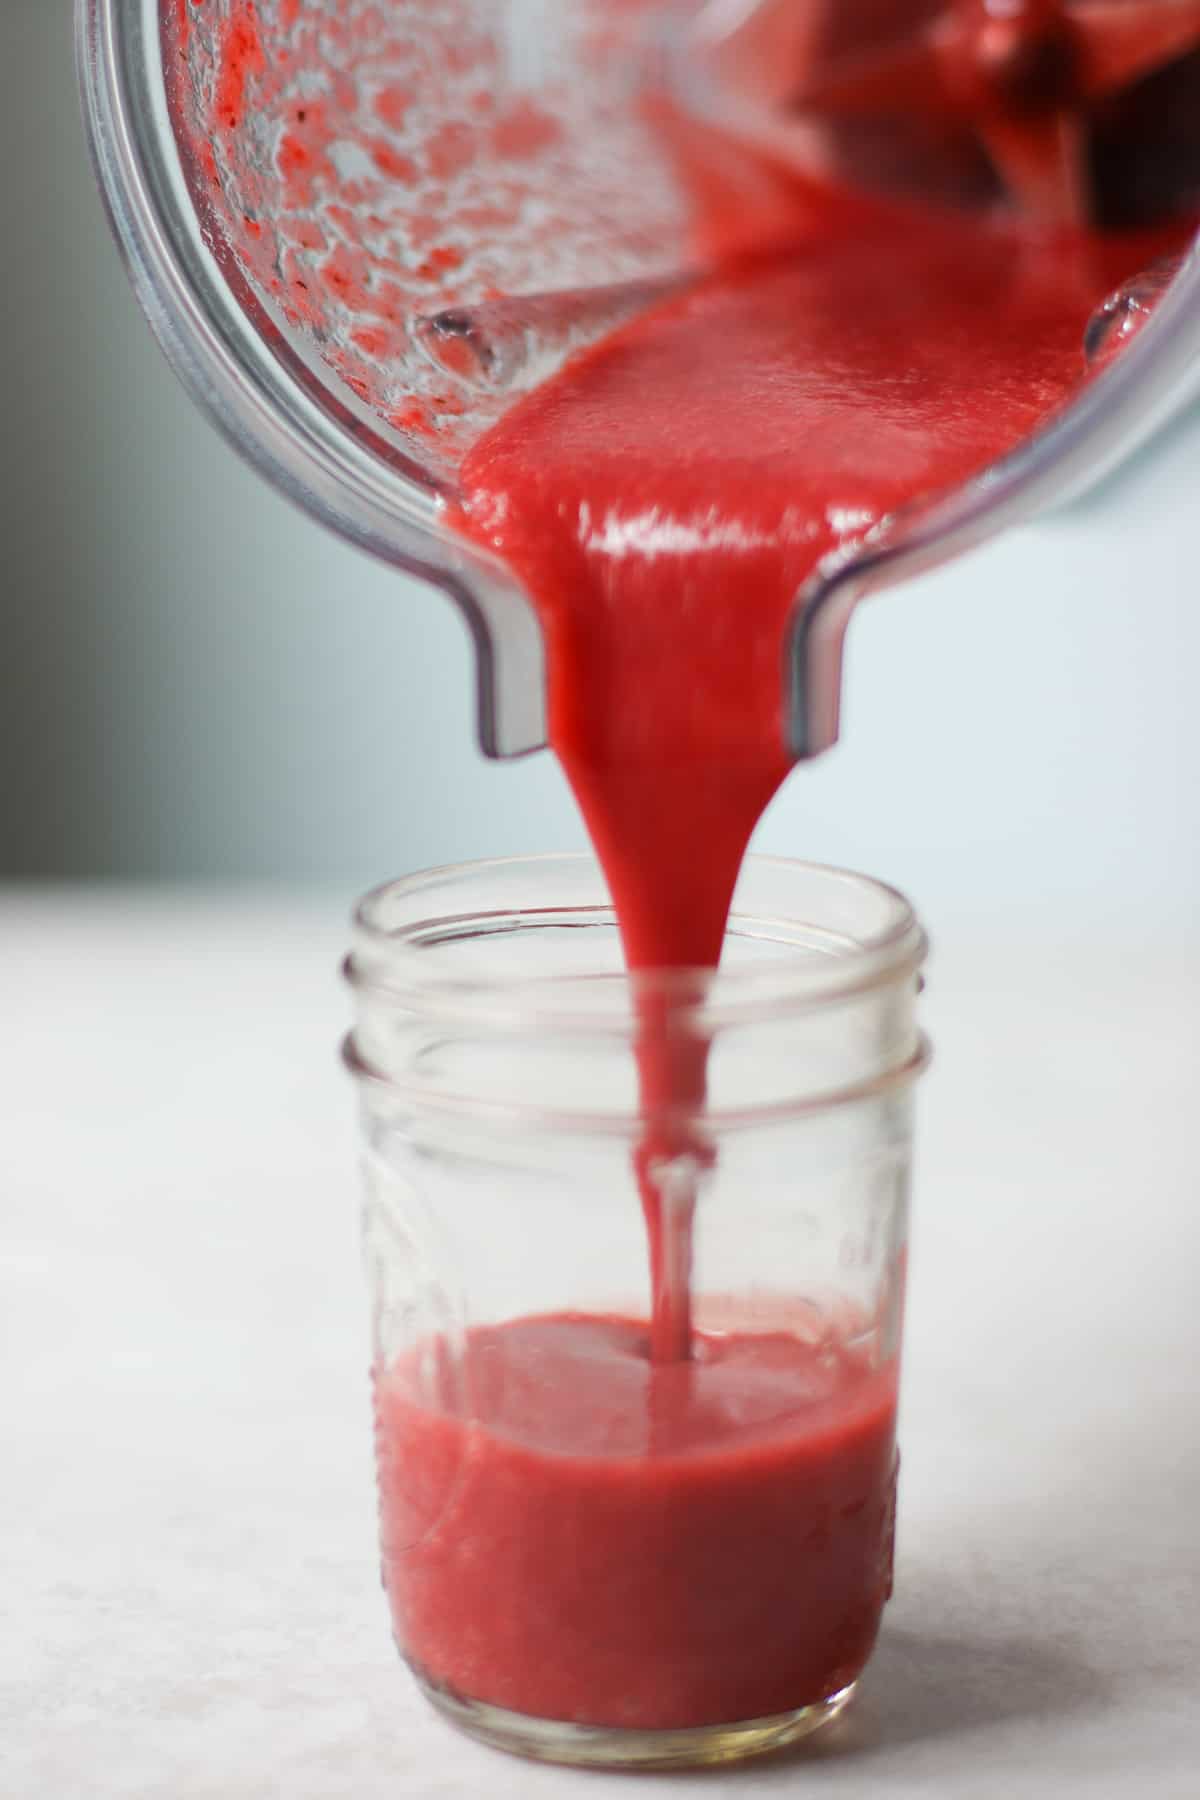 Strawberry juice being poured from blender.